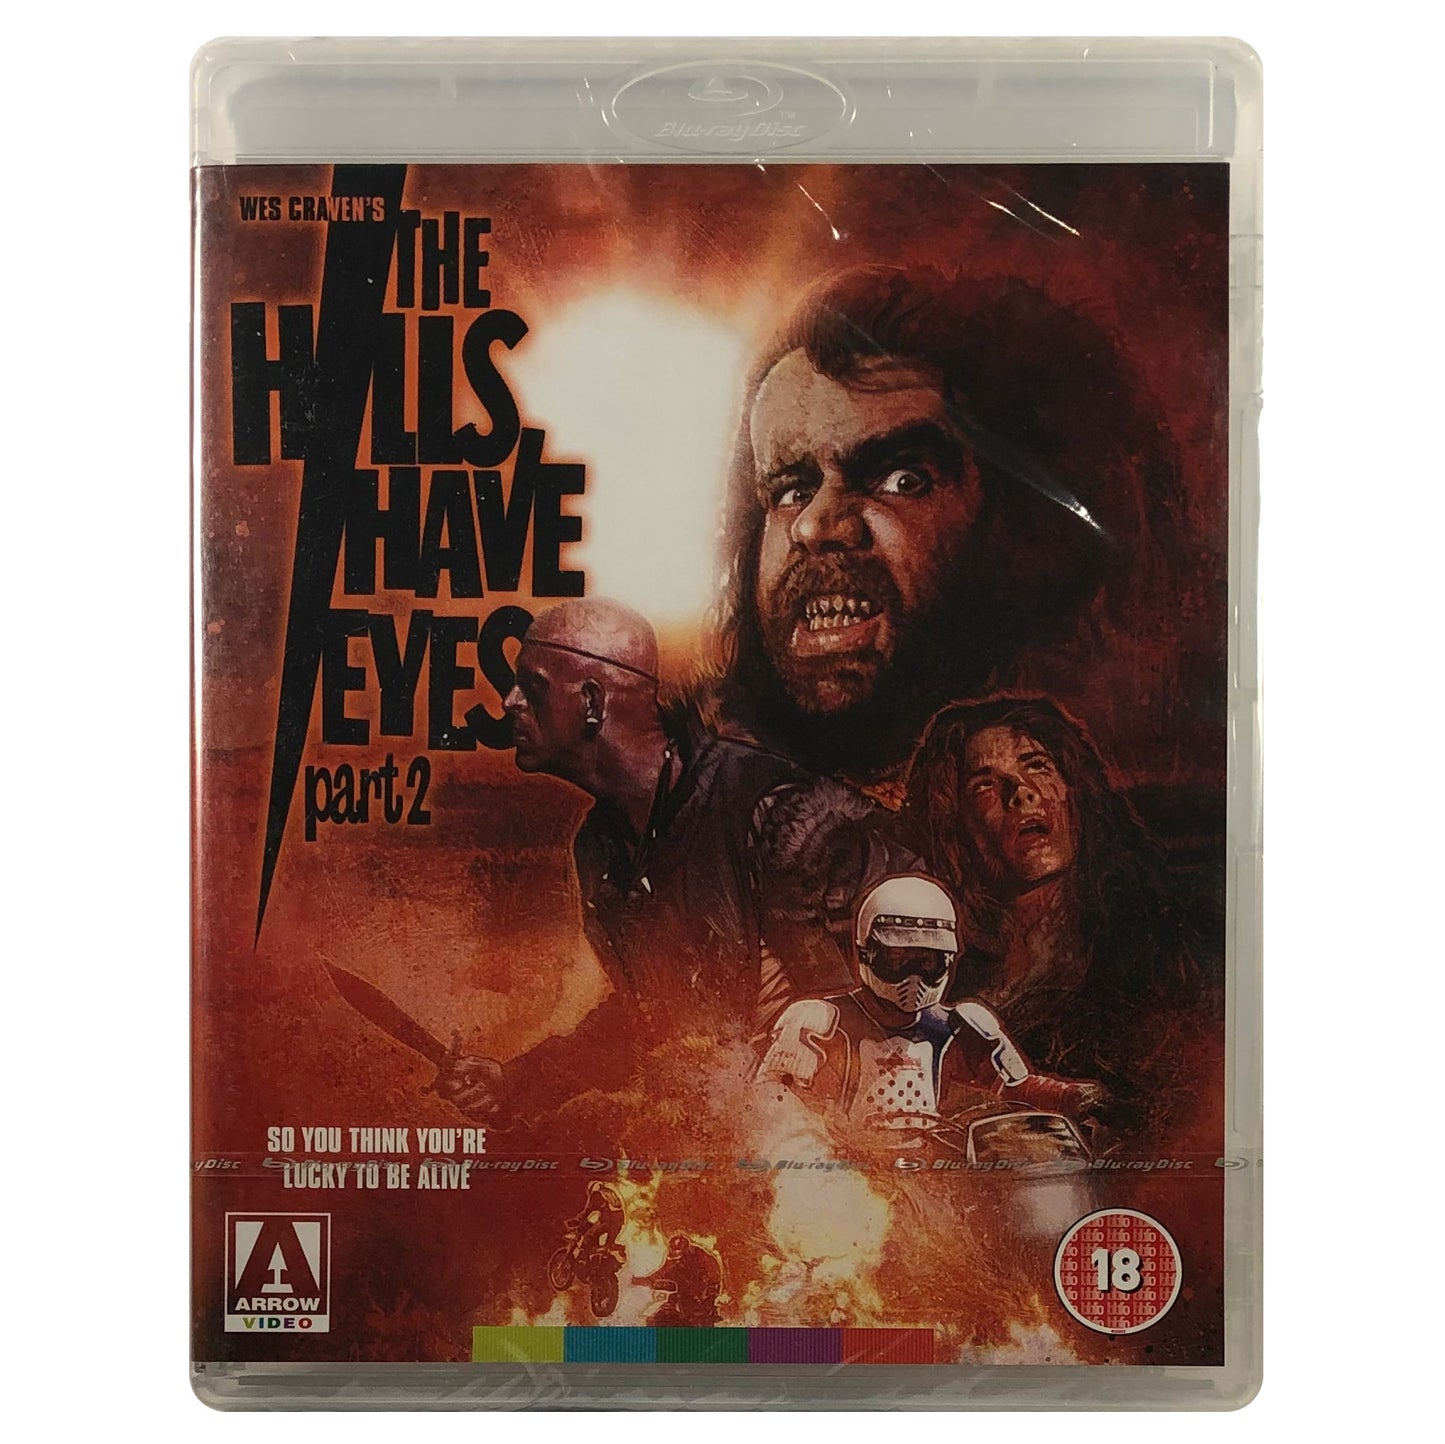 The Hills Have Eyes Part 2 Blu-Ray